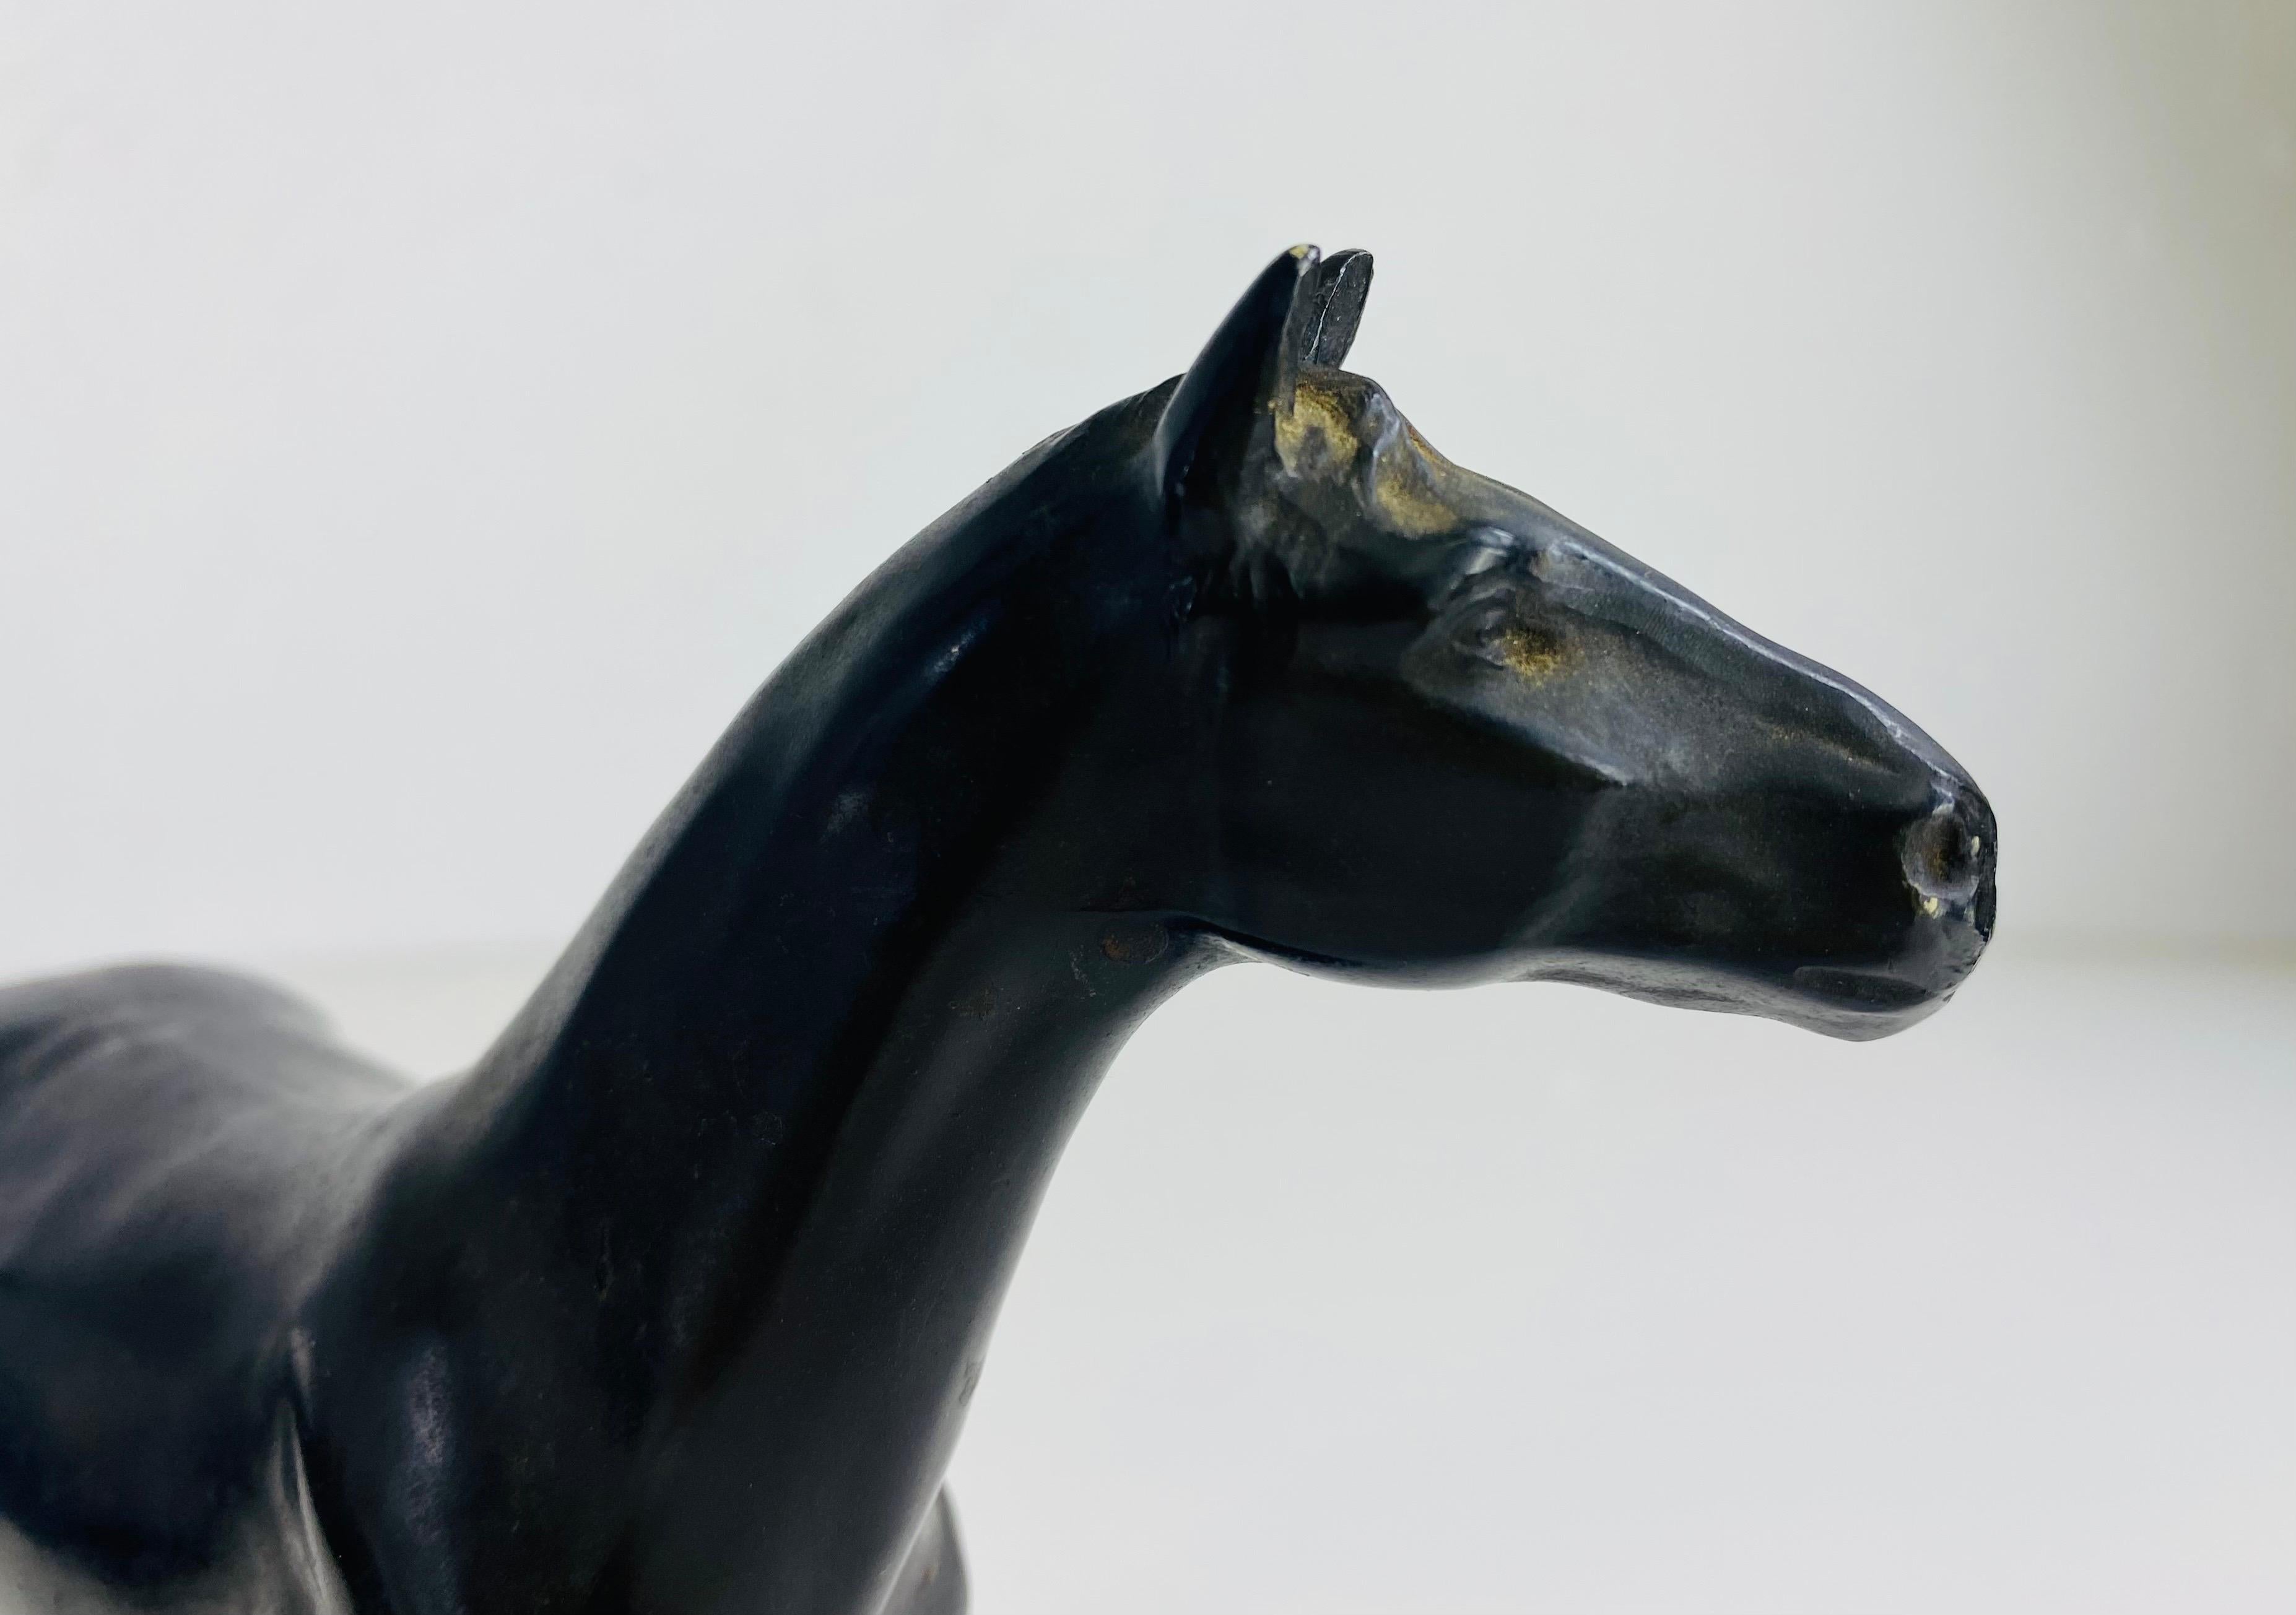 American Early 20th century bronze equestrian horse sculpture. For Sale